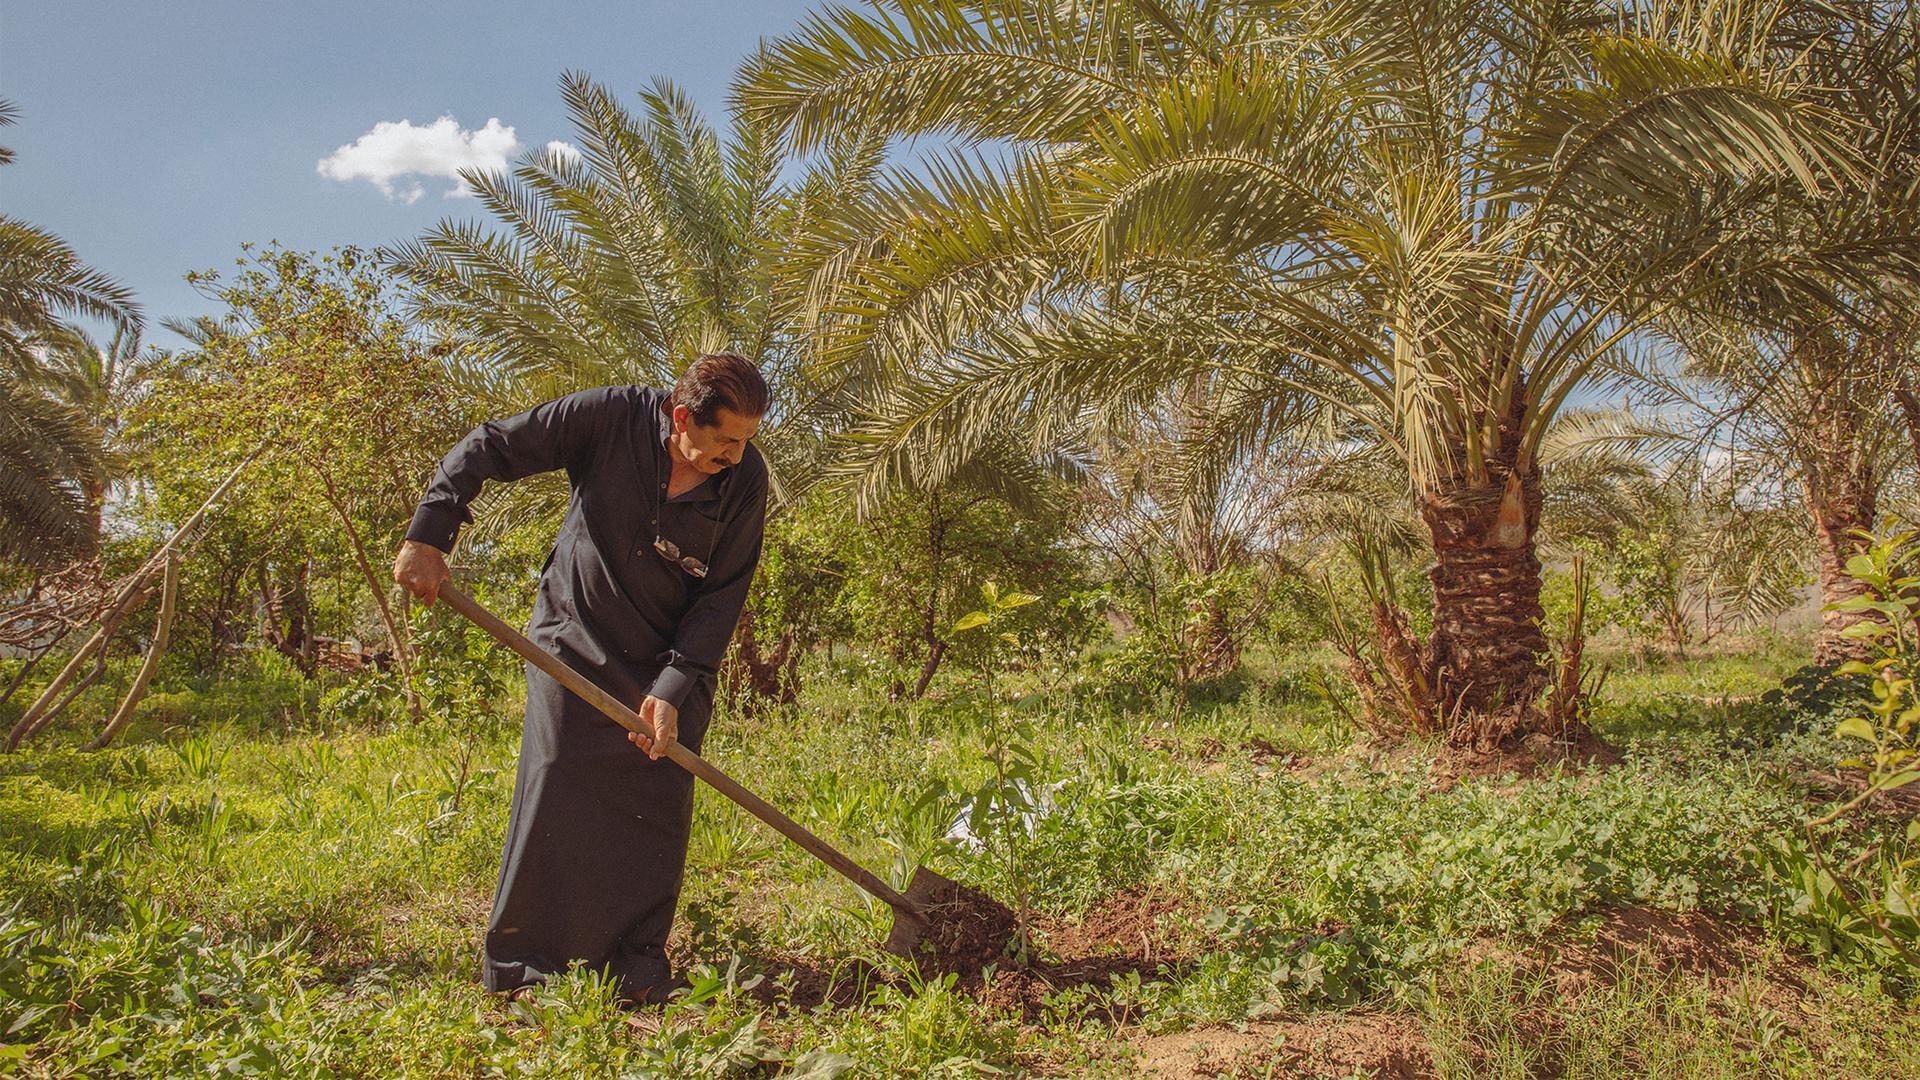 Ayyad Mohmmed Ali works on his farm where he grows date palm trees and vegetables, Iraq.